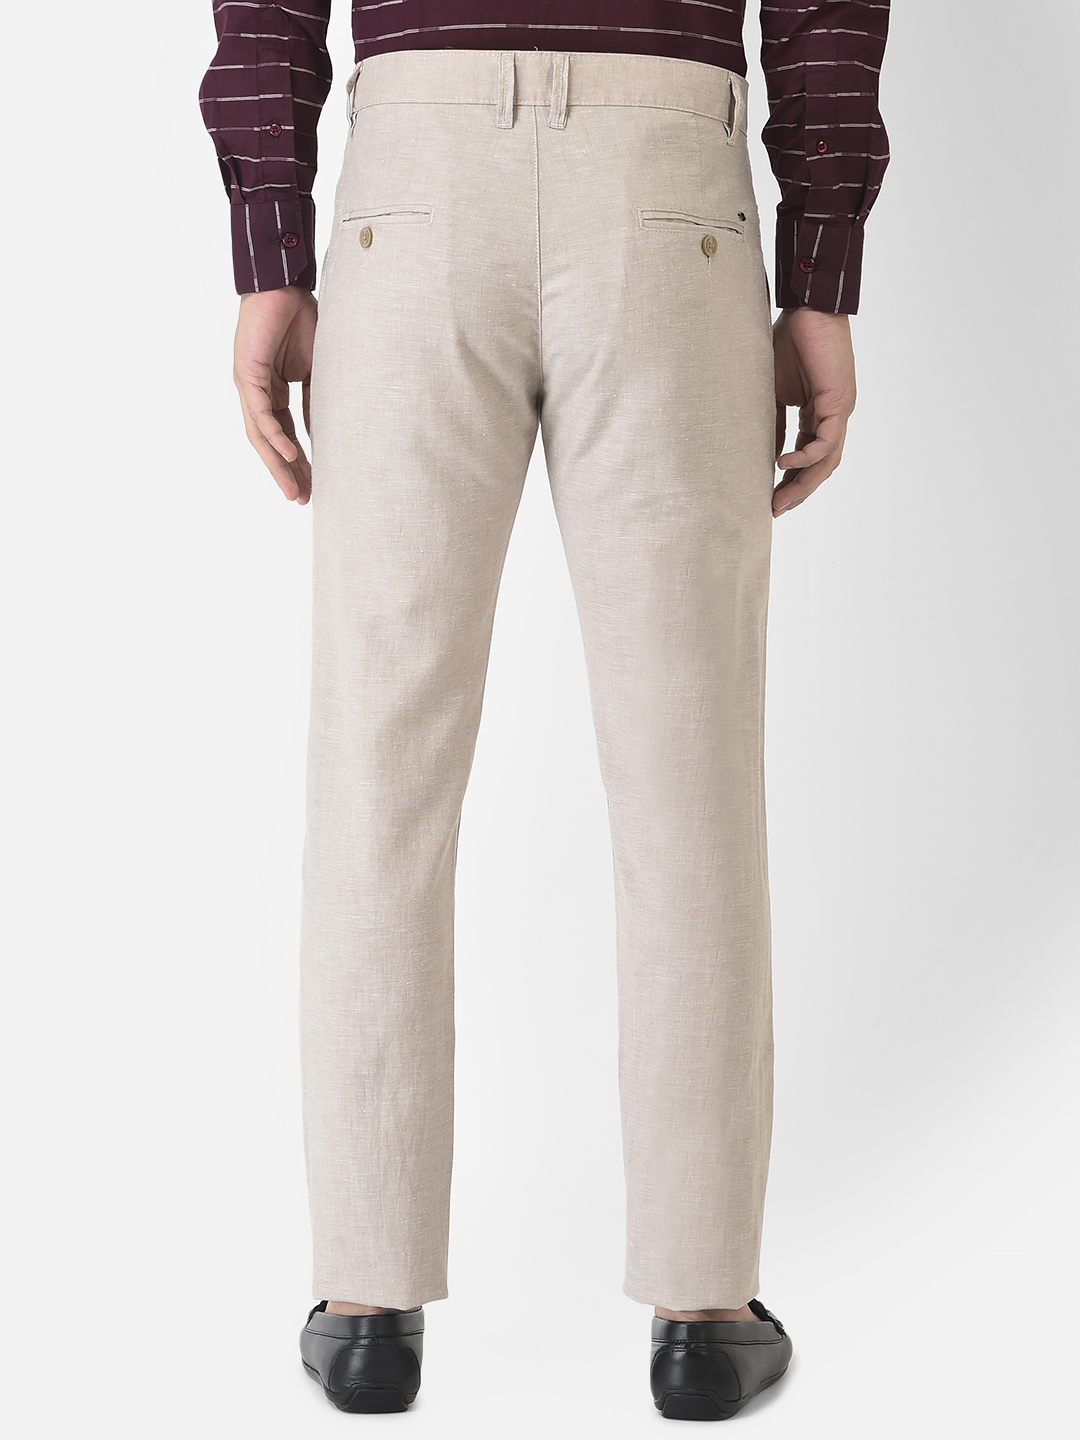 Parx Casual Trousers : Buy Parx Grey Solid Casual Trousers Online|Nykaa  Fashion.